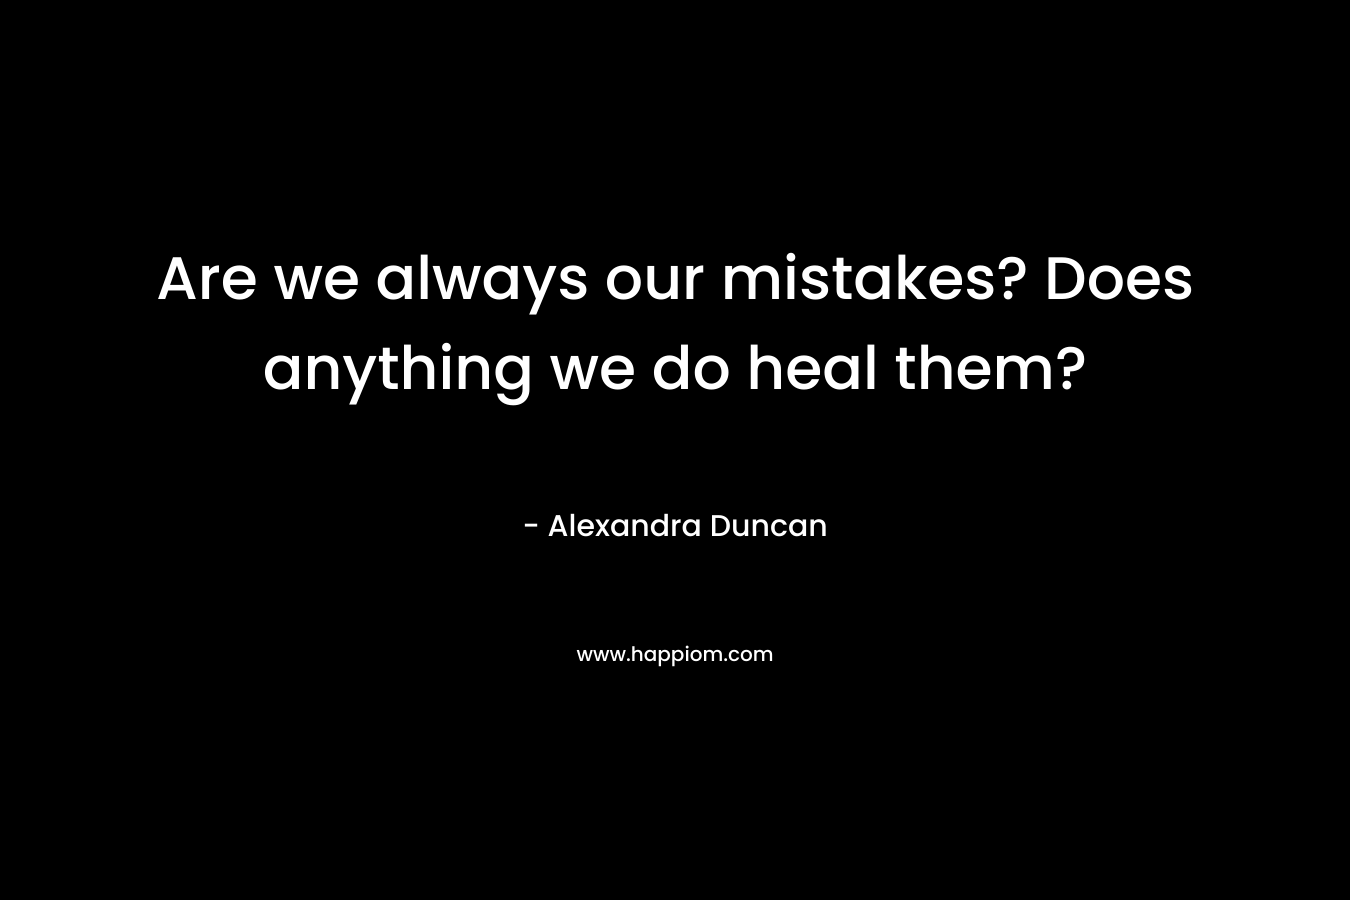 Are we always our mistakes? Does anything we do heal them?